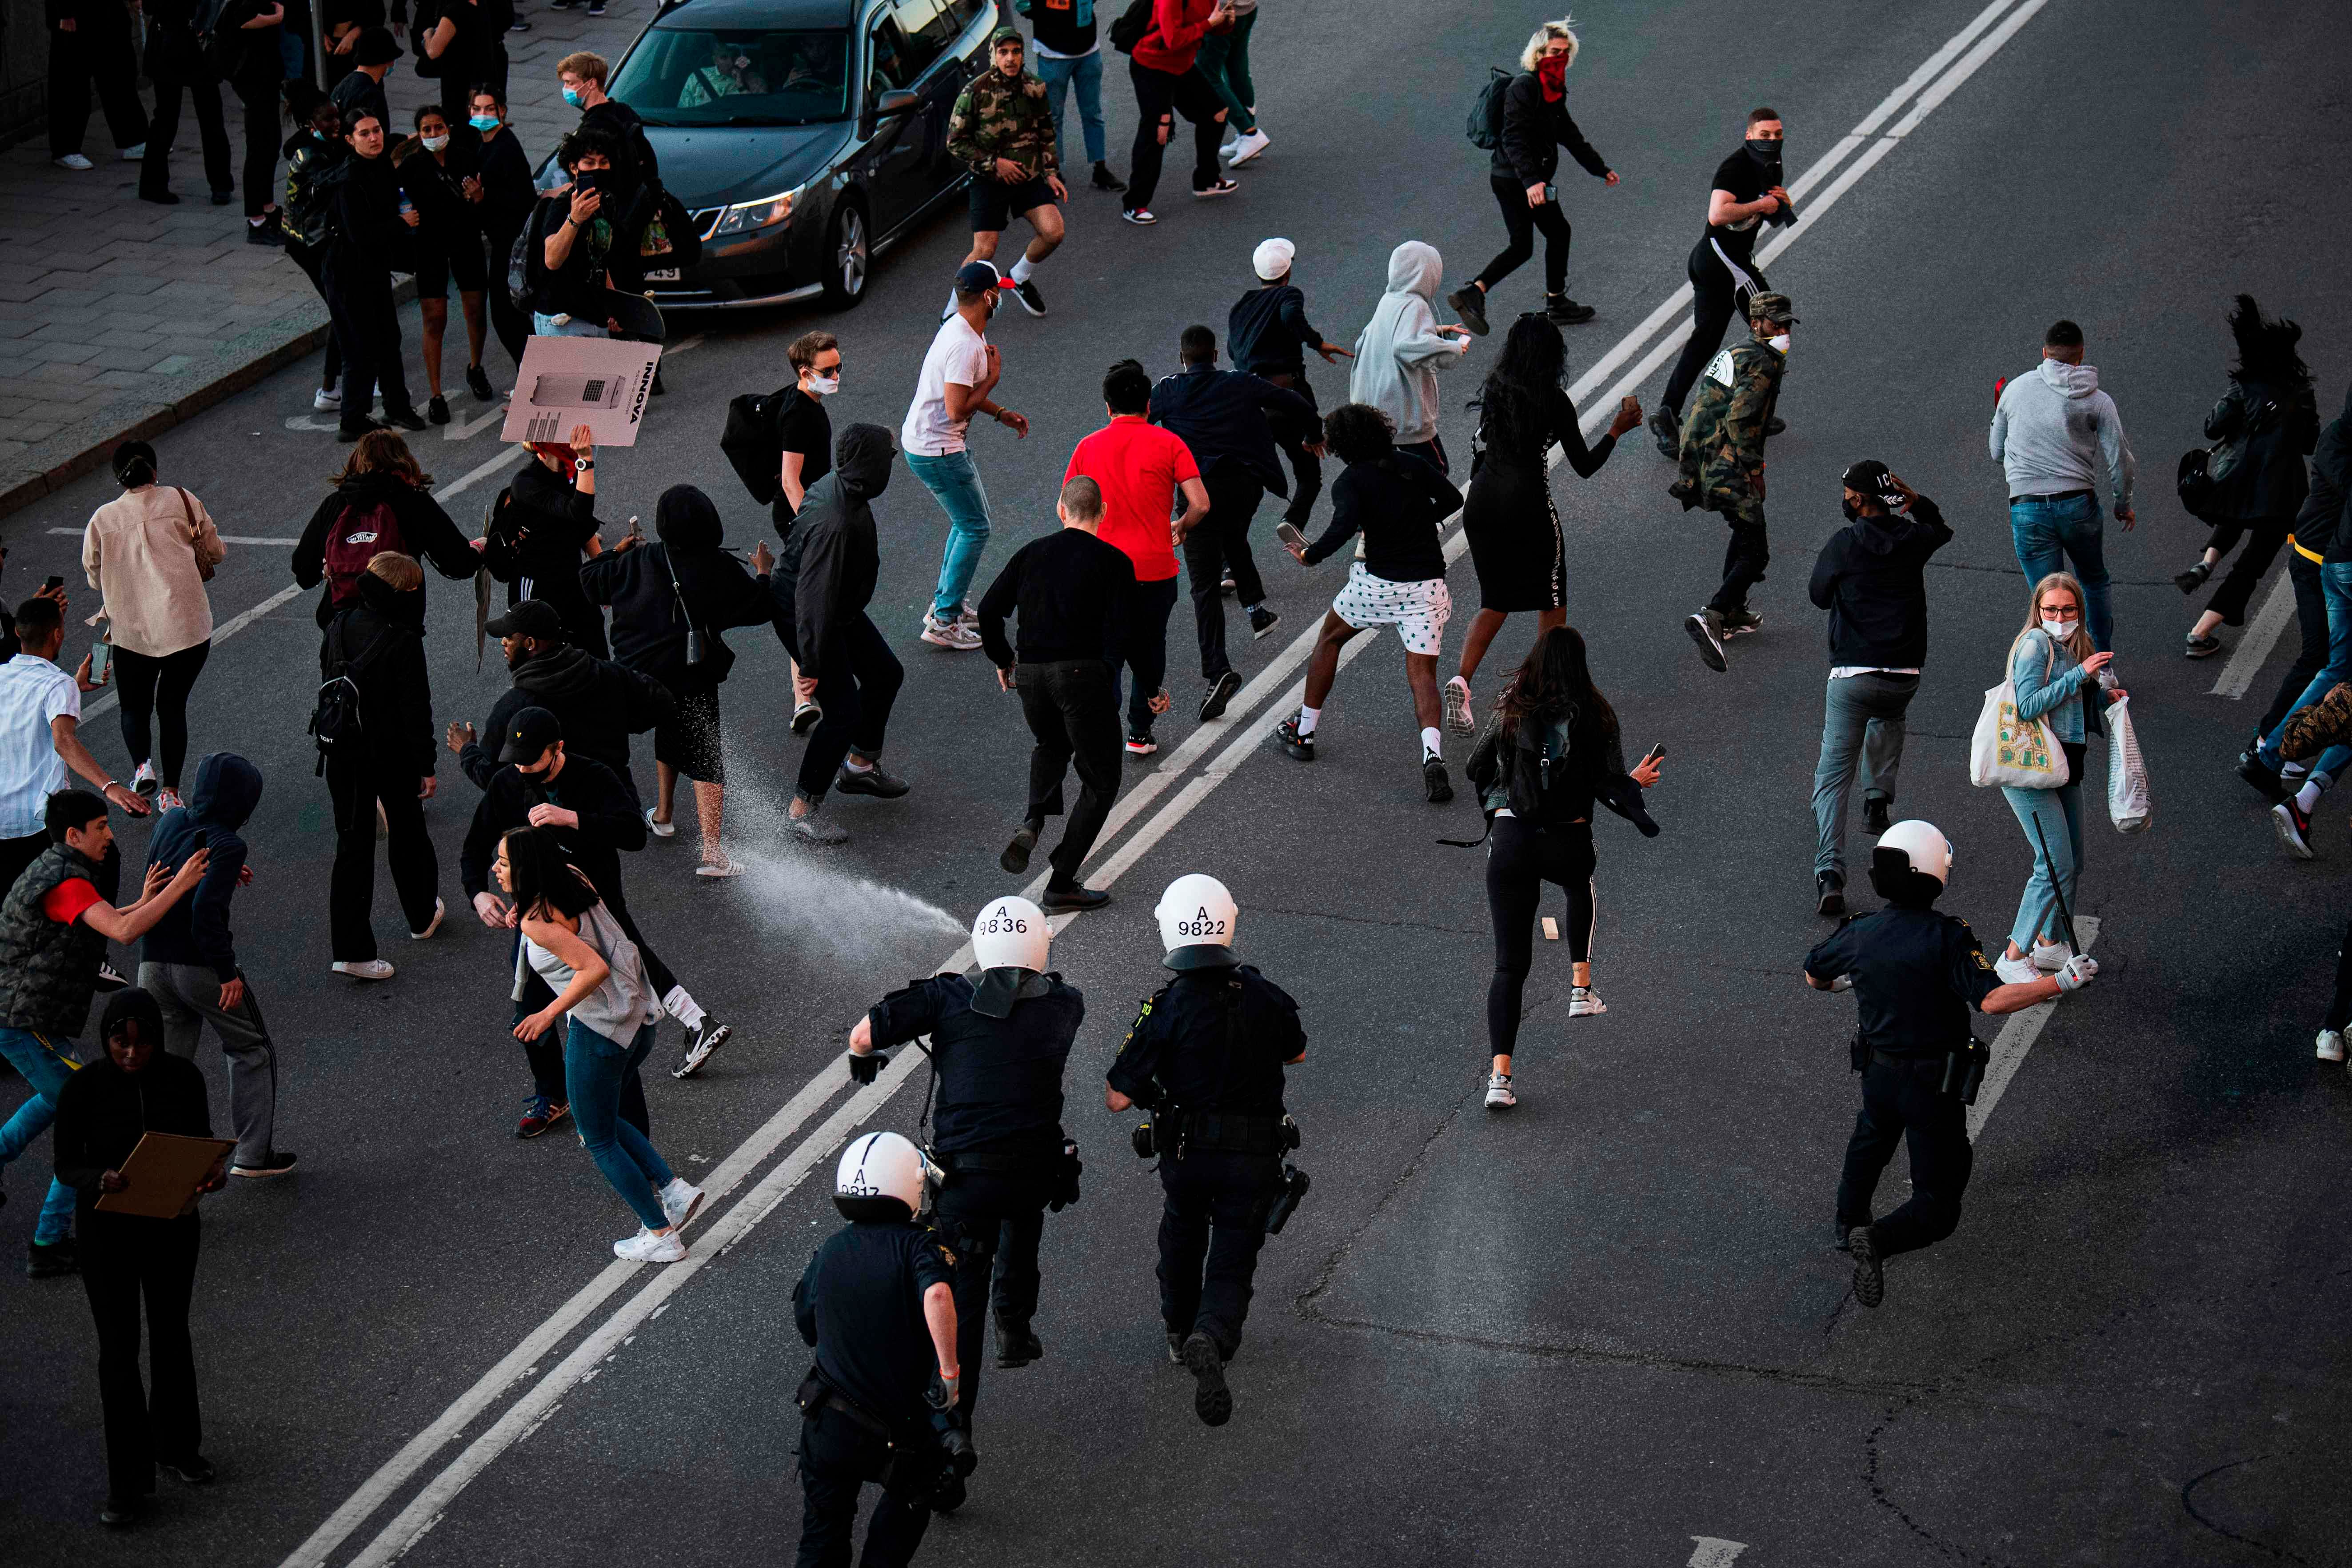 Protesters run as police use pepper spray during a Black Lives Matter demonstration in Stockholm, Sweden, on June 3, 2020, in solidarity with protests raging across the United States over the death of George Floyd. (Photo by AFP)